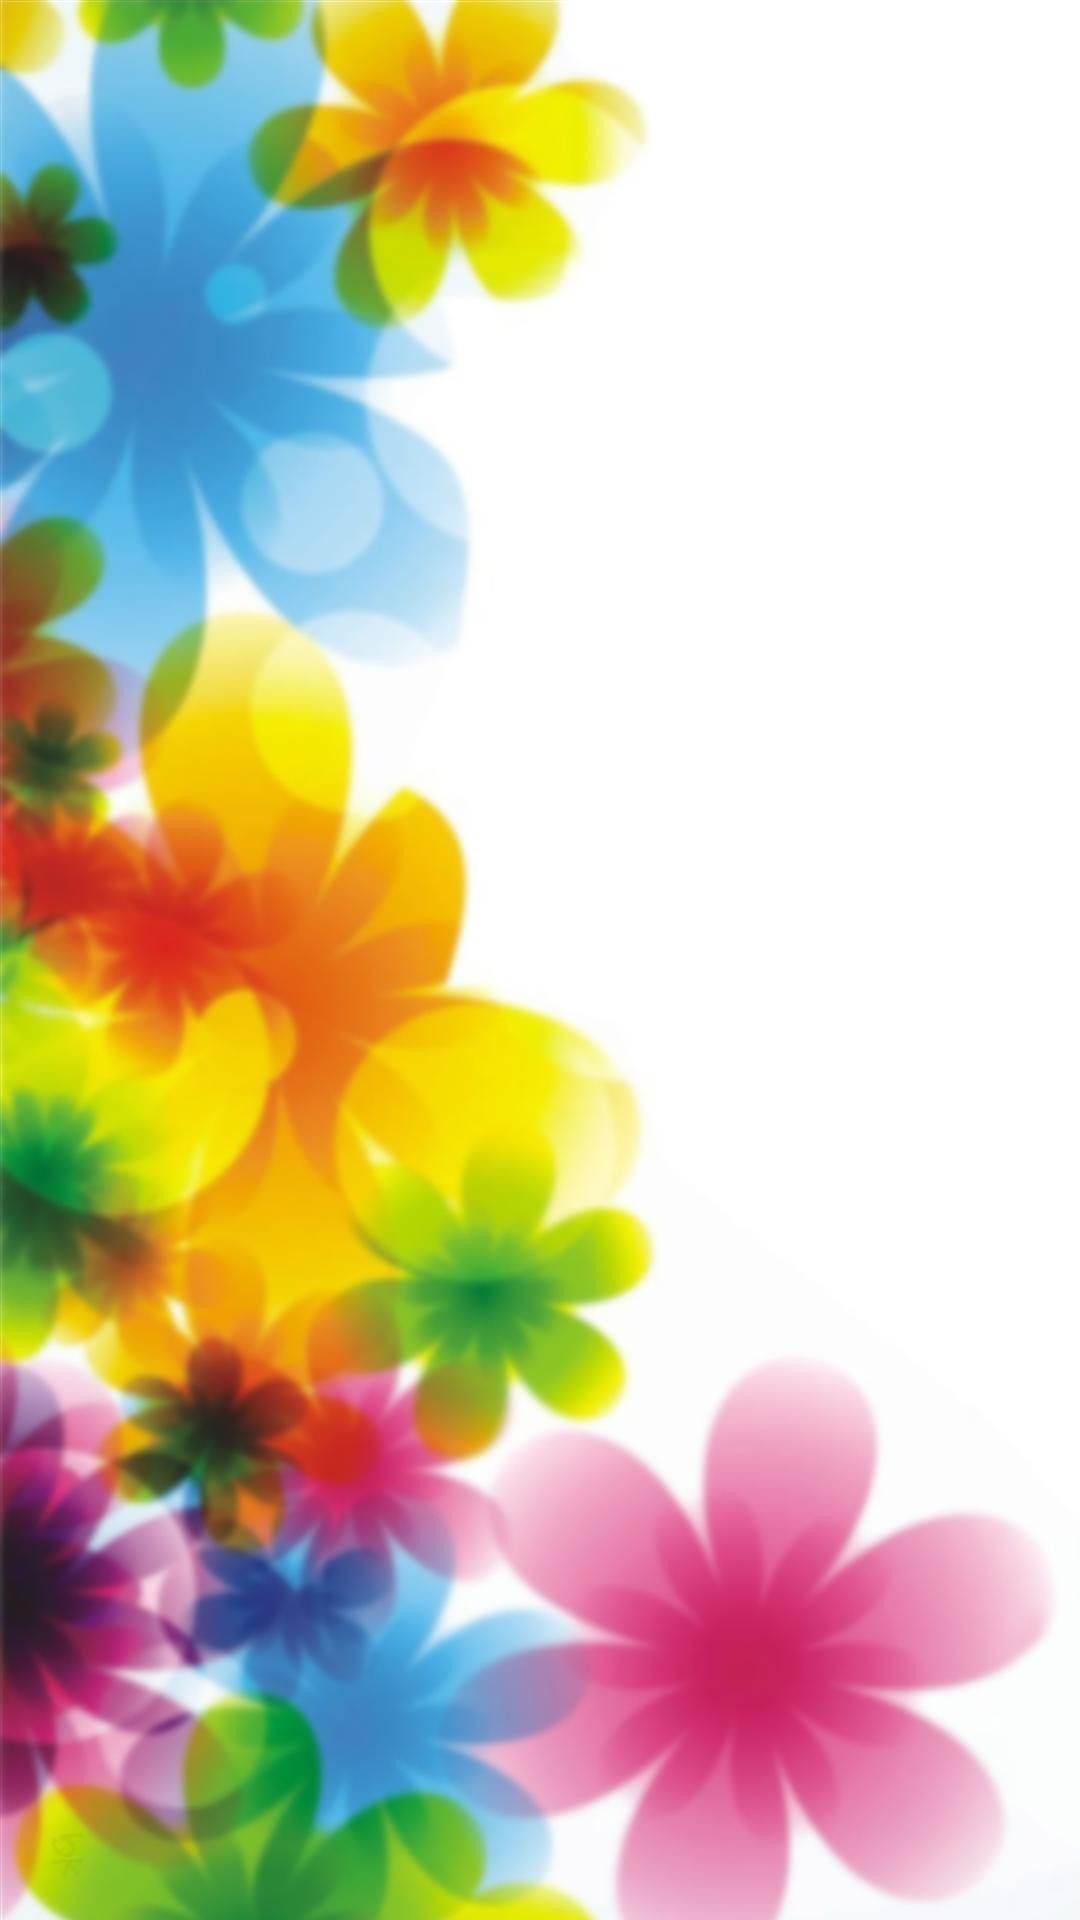 Colorful Floral Print Iphone Wallpaper - Colorful Flowers Wallpaper For Iphone , HD Wallpaper & Backgrounds